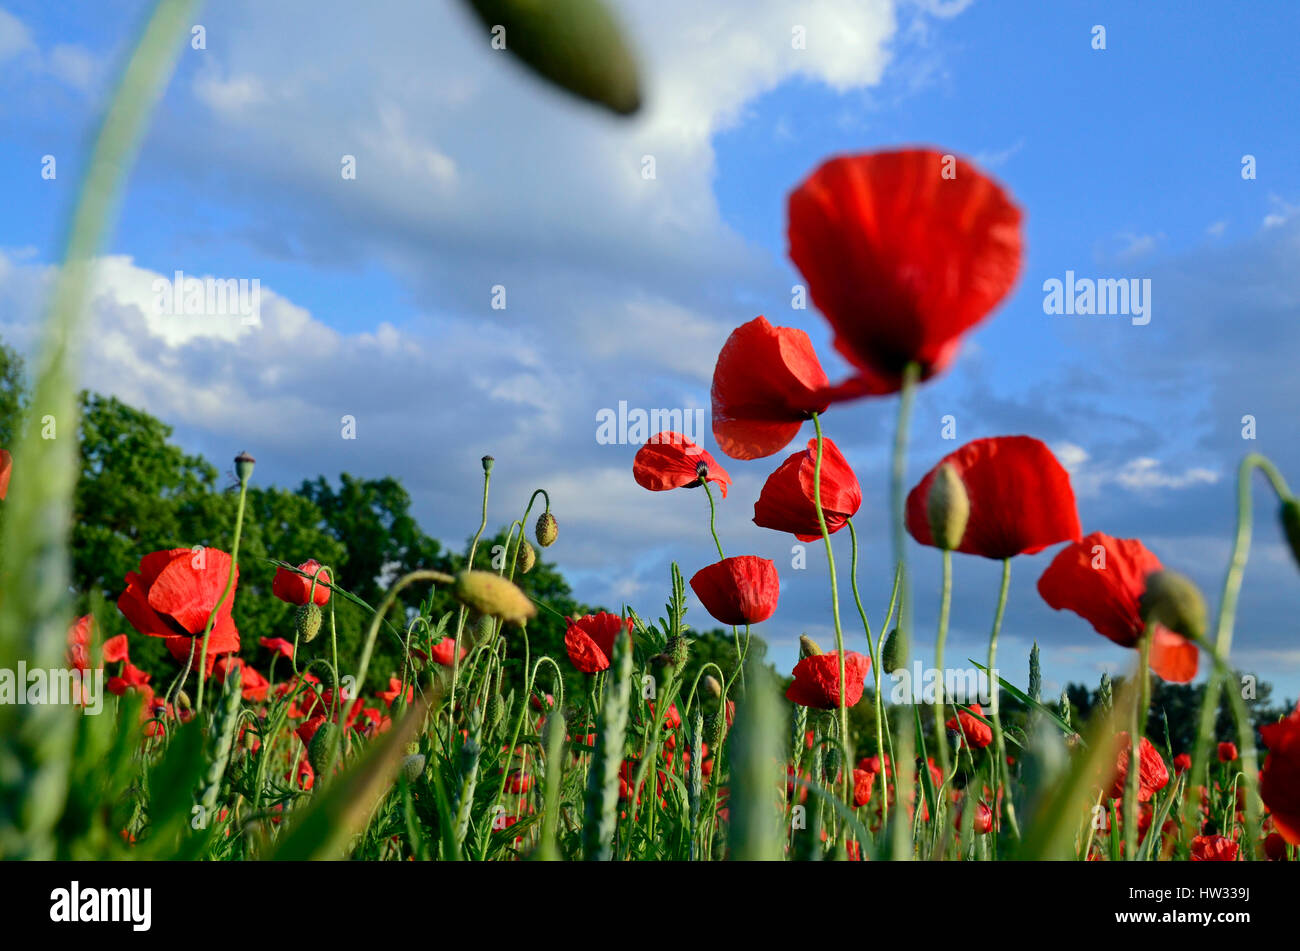 Red poppies against a blue sky Stock Photo